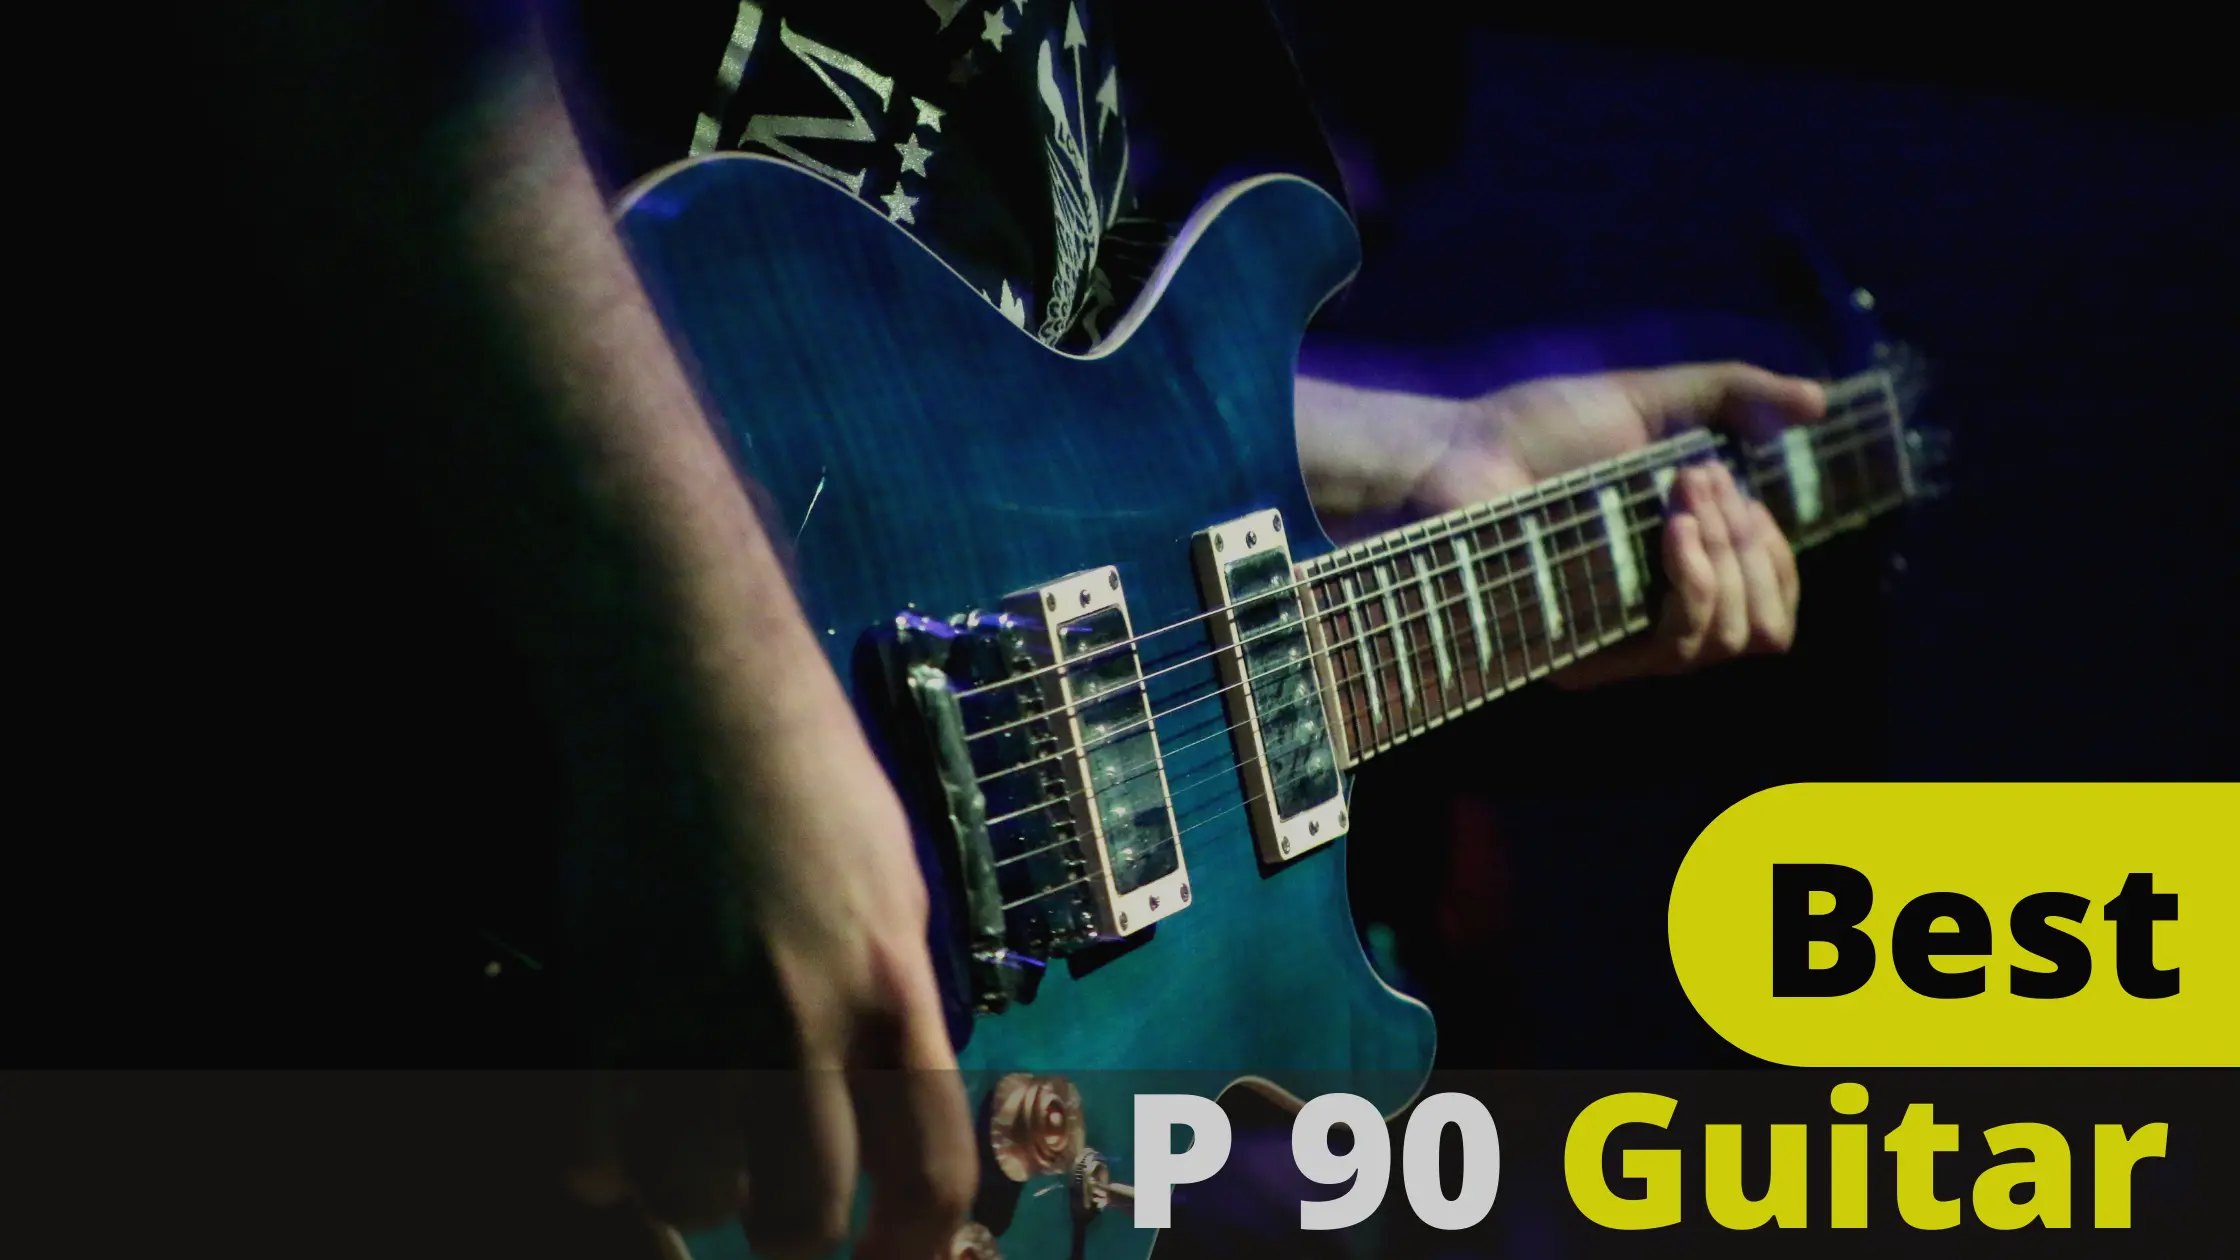 Top 10 Best P 90 Guitar Reviews and Buying Guide 2022